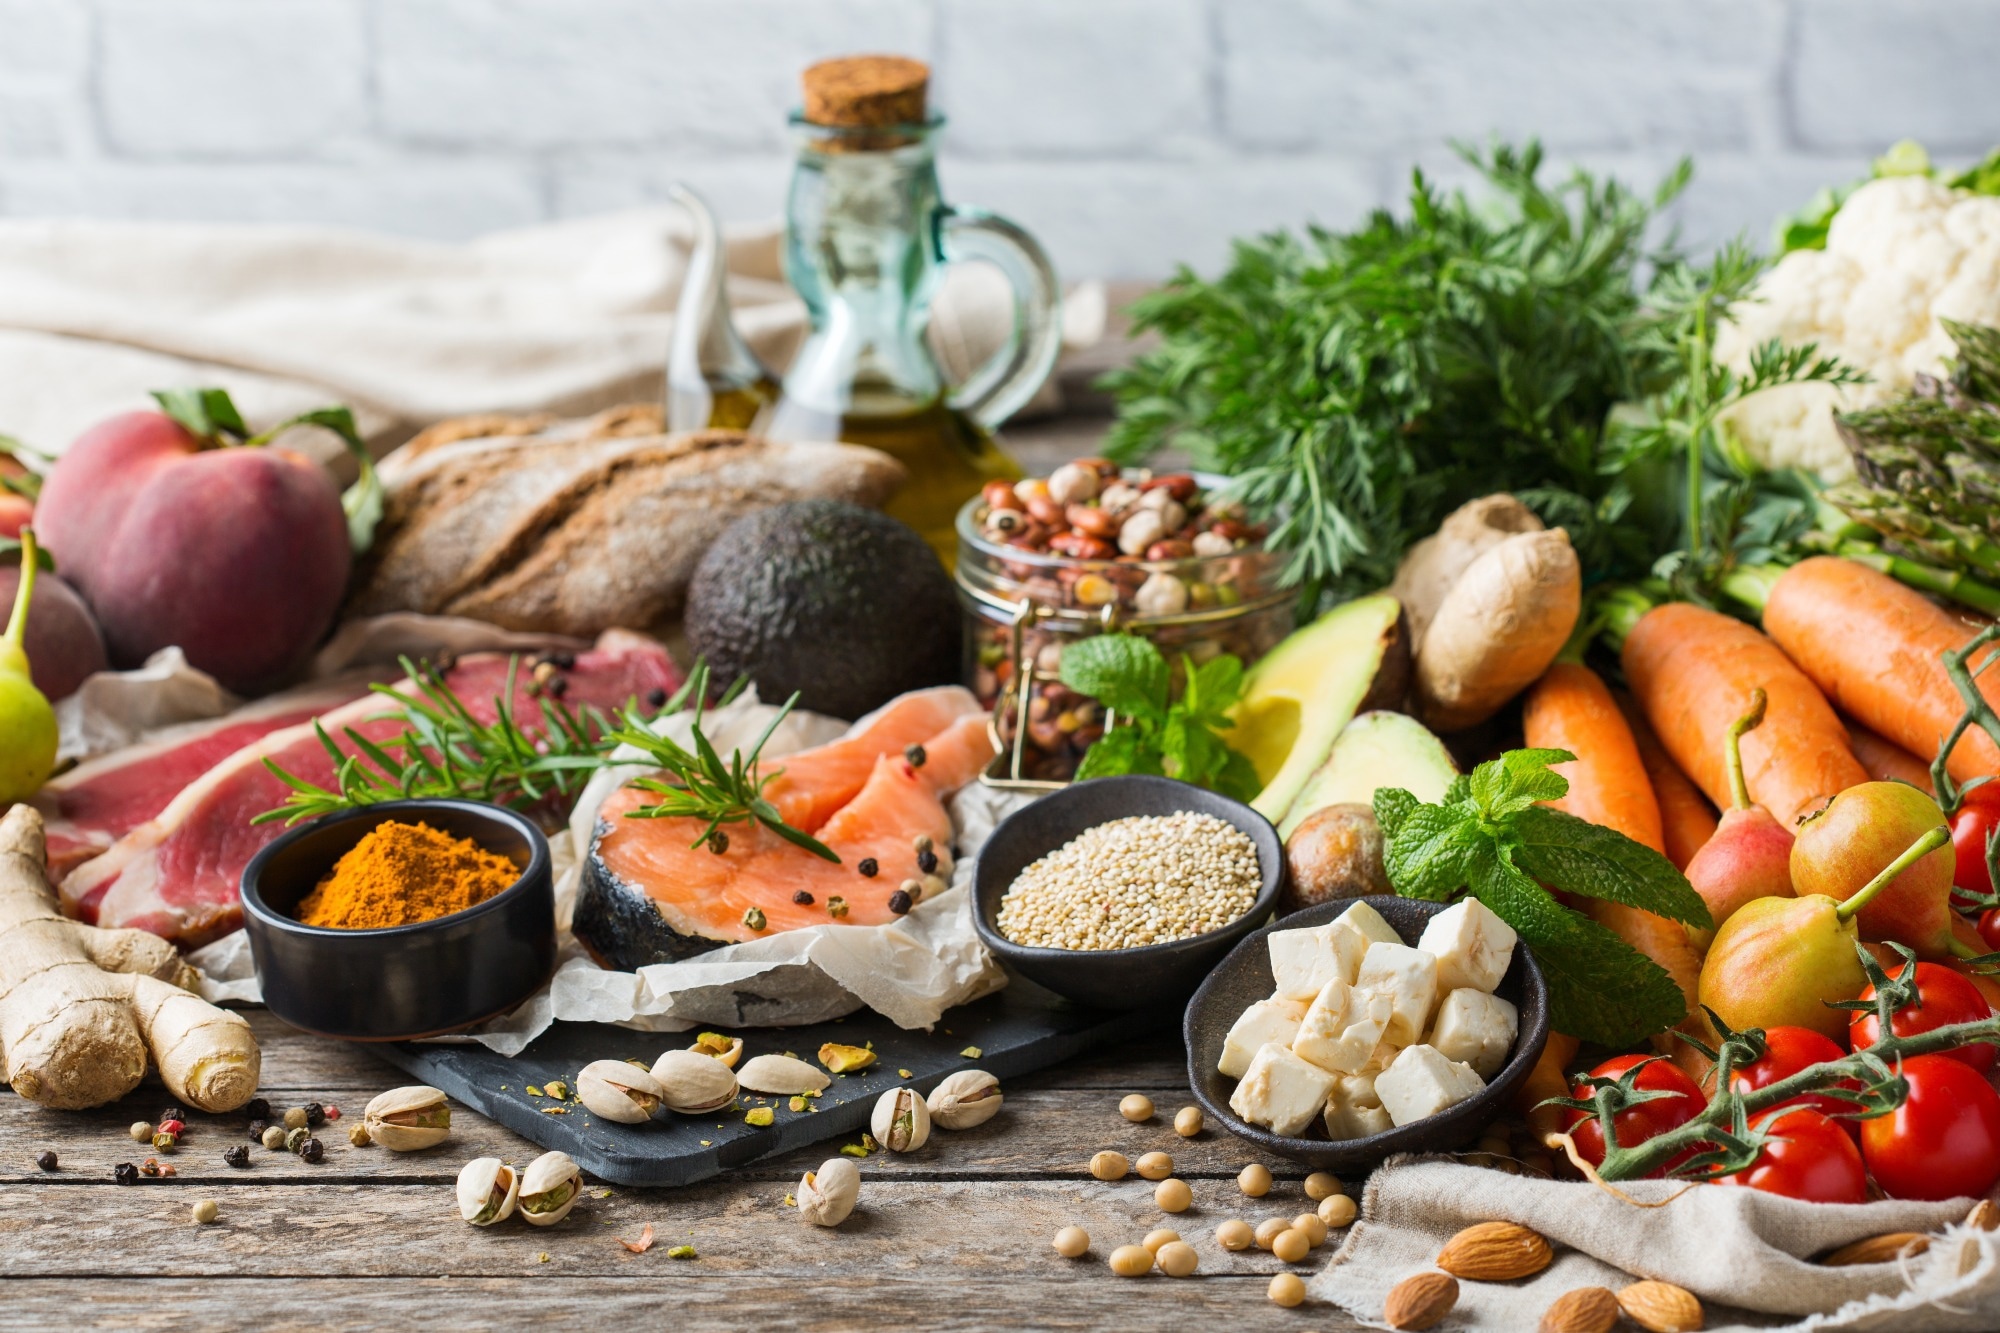 Study: A nutritional biomarker score of the Mediterranean diet and incident type 2 diabetes: Integrated analysis of data from the MedLey randomised controlled trial and the EPIC-InterAct case-cohort study. Image Credit: AntoninaVlasova/Shutterstock.com